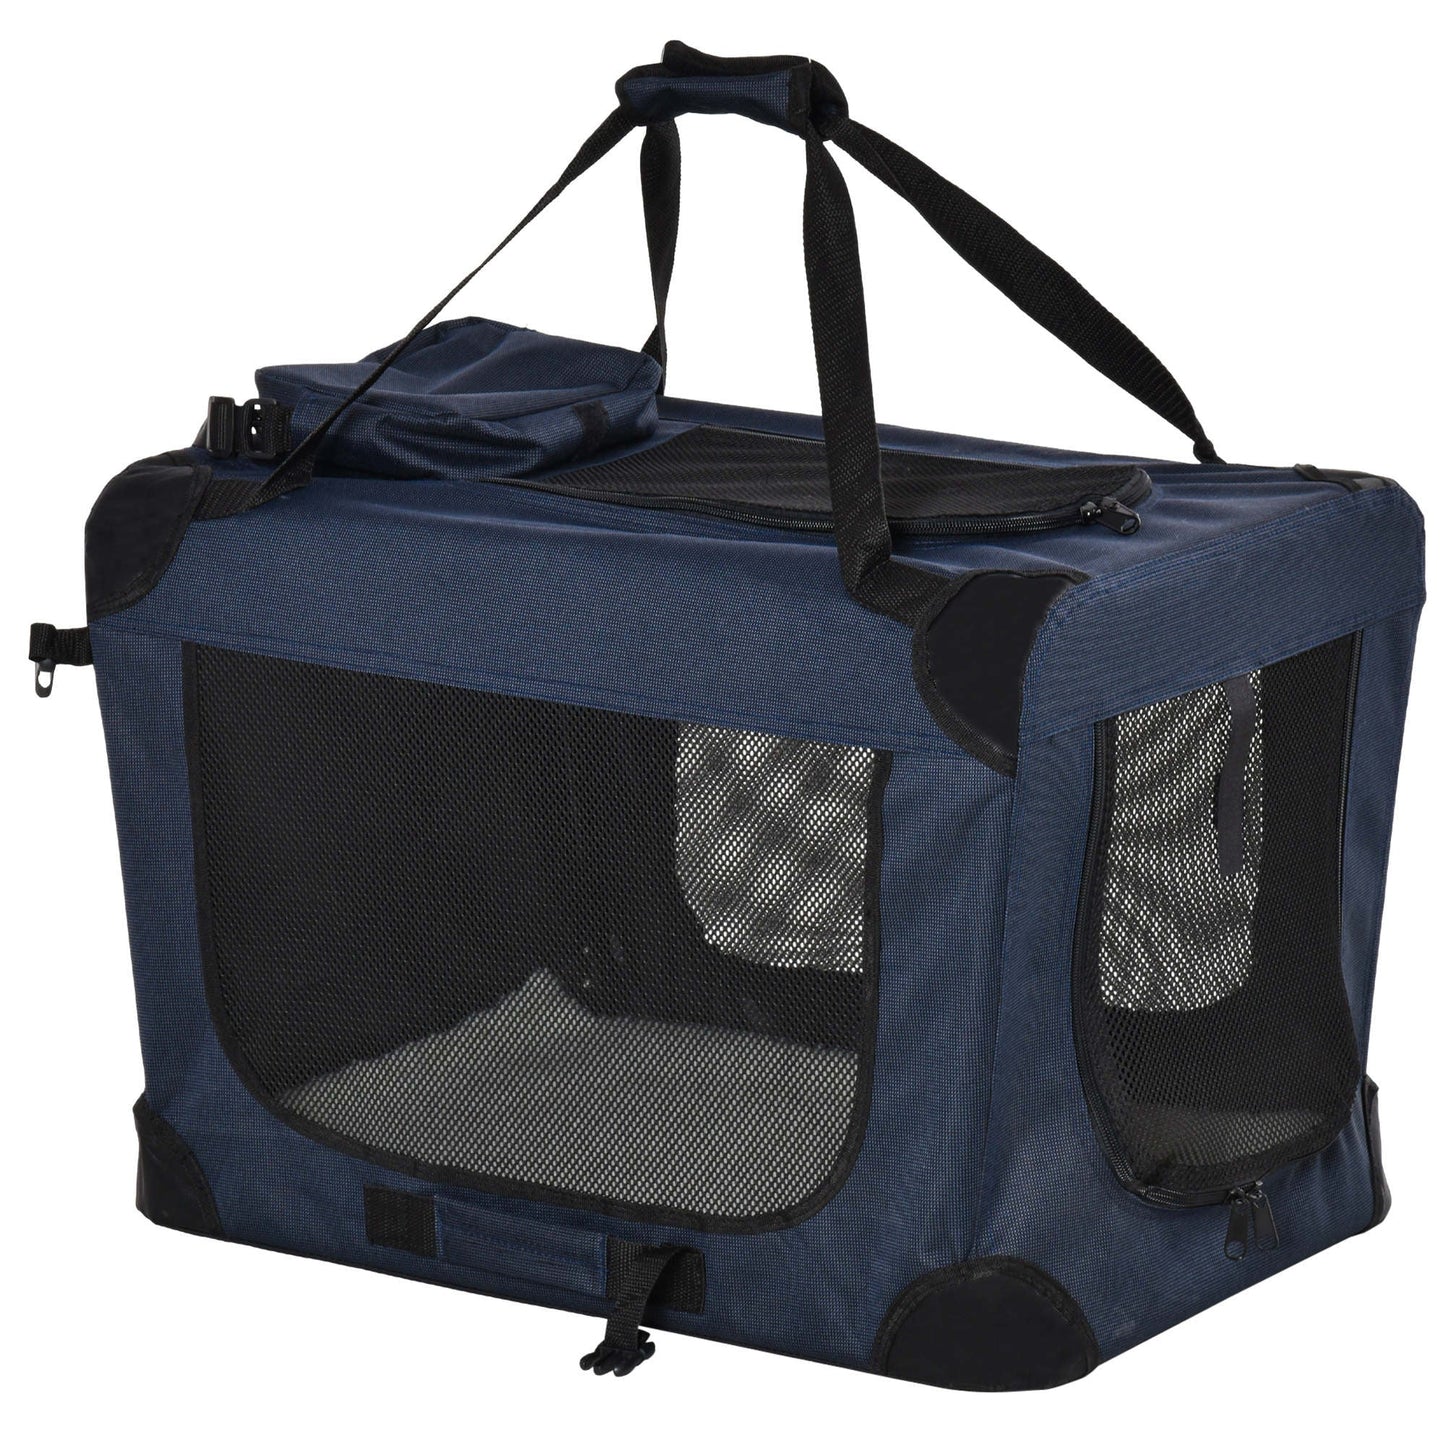 PAWHUT 3 input dog bag with pillow and storage bags, in blue oxford fabric and metal, 70x51x50 cm